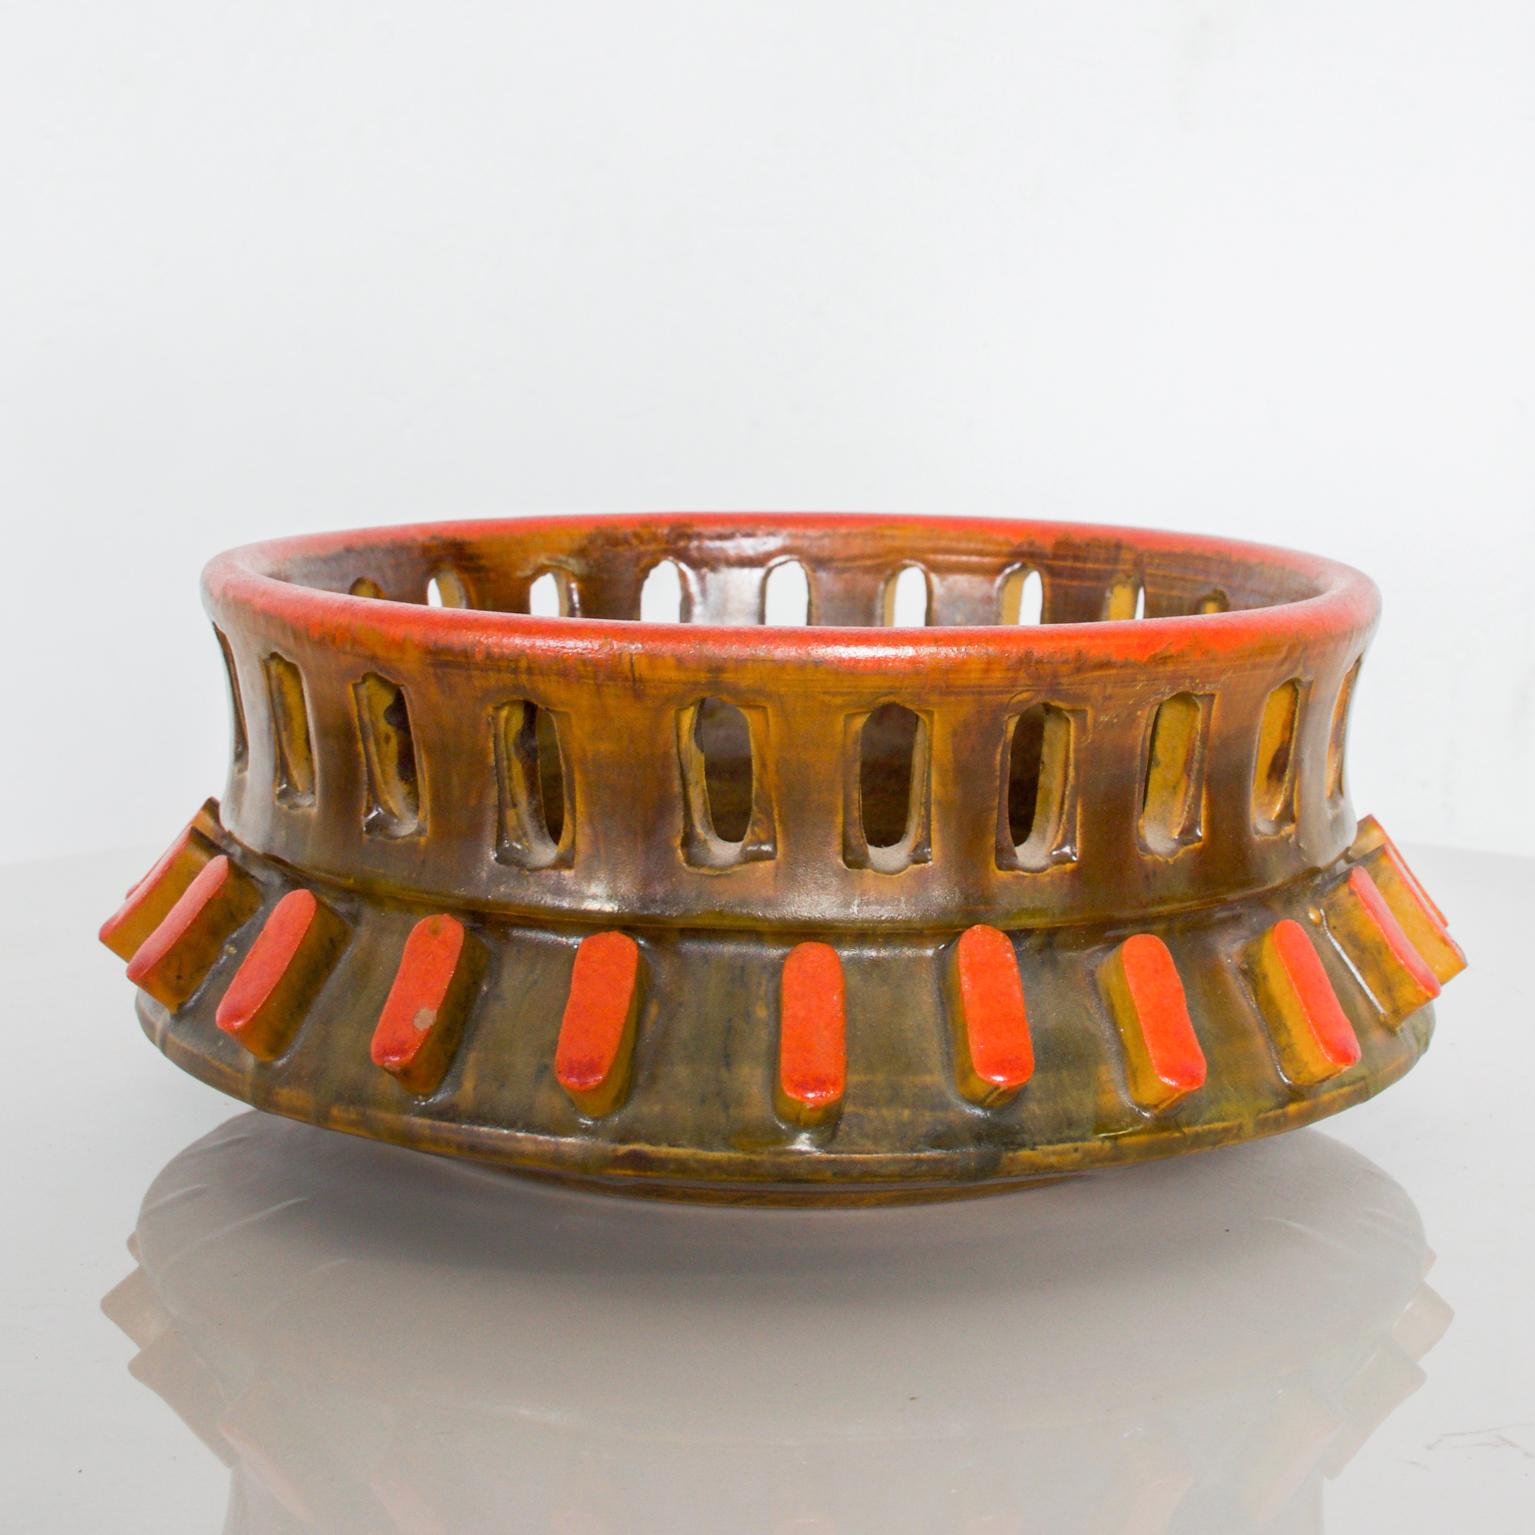 Presenting: For Raymor by Alvino Bagni sea garden vintage ceramic pottery ashtray in burnt orange
Serves a decorative dish or bowl as well
Vibrant fall colors. Mid-Century Modern, Italy, 1960s
Made stamped Italy. Colorful Italian Studio Pottery in